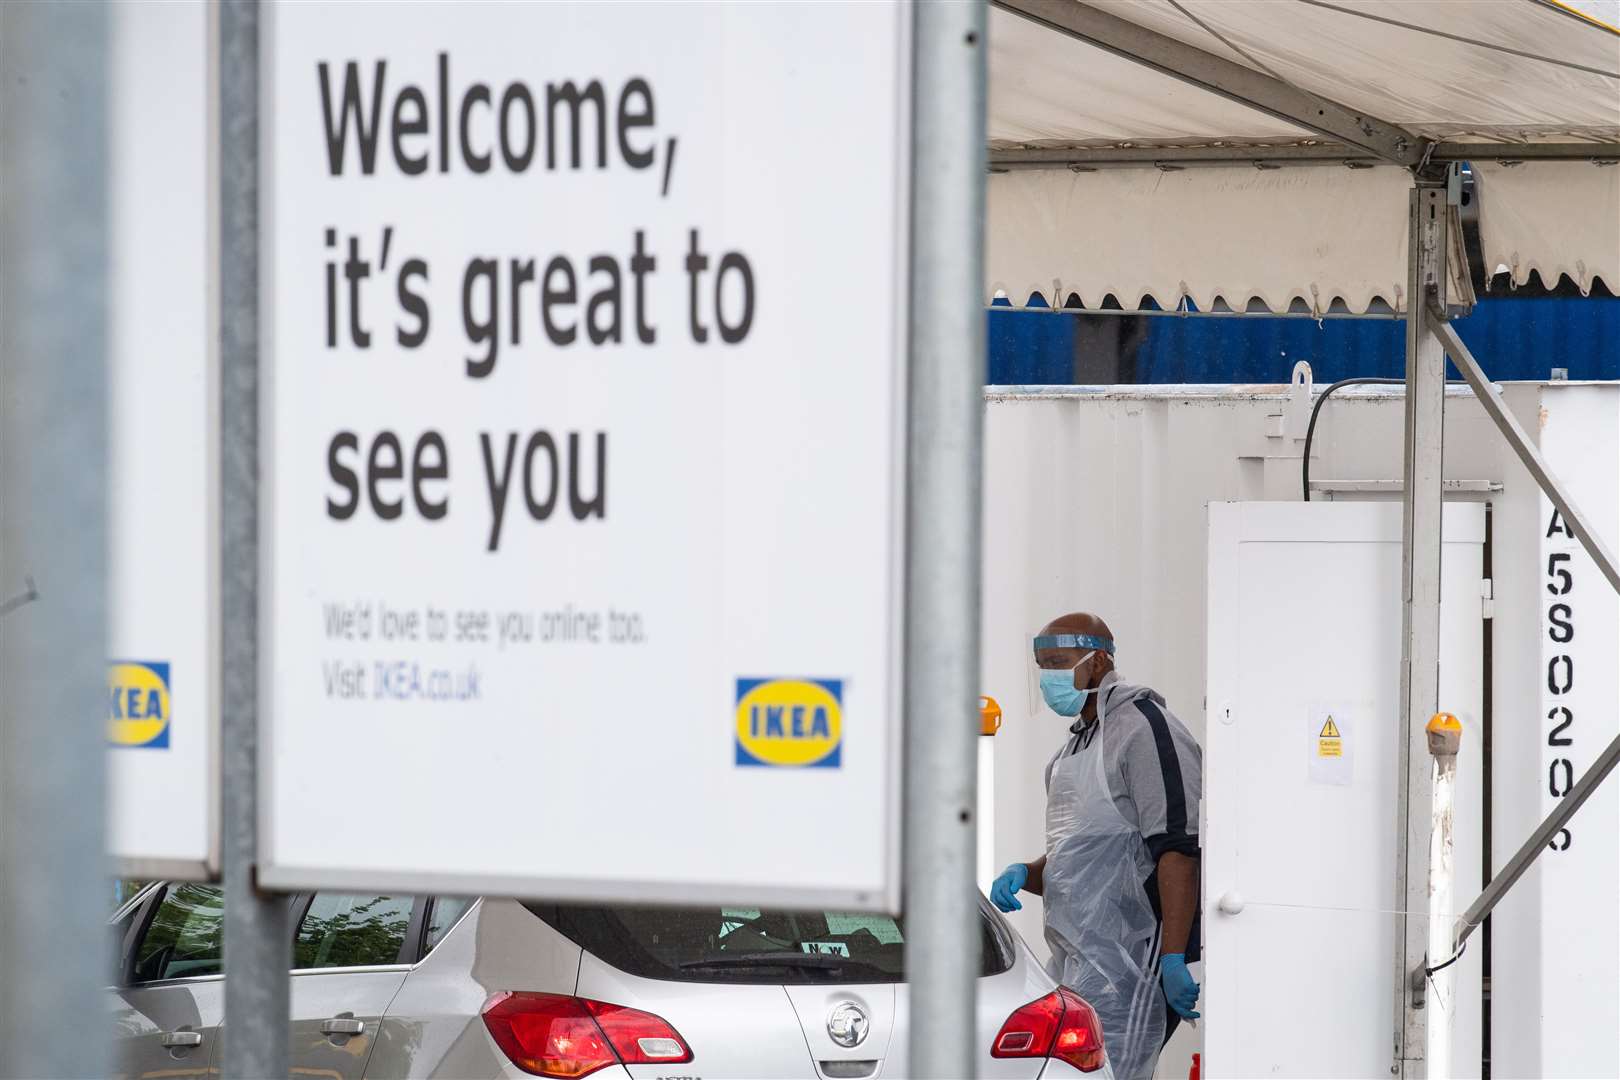 Ikea has handed over some carparks to be used as Covid-19 testing sites (Dominic Lipinski/PA)